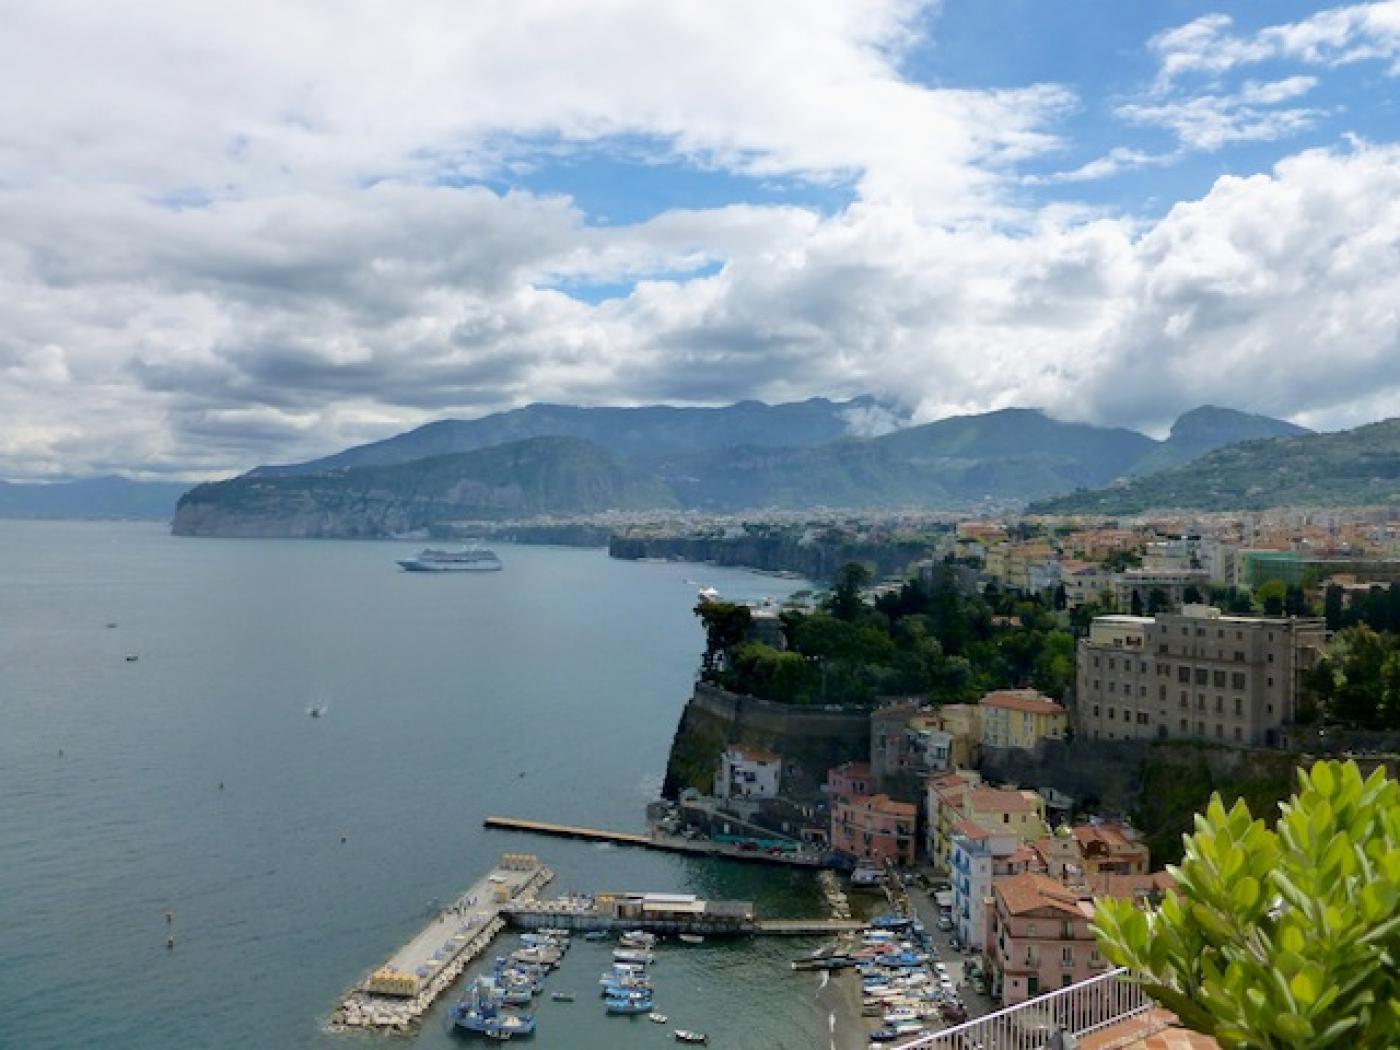 Naples: A Beautiful Perilous City by the Bay